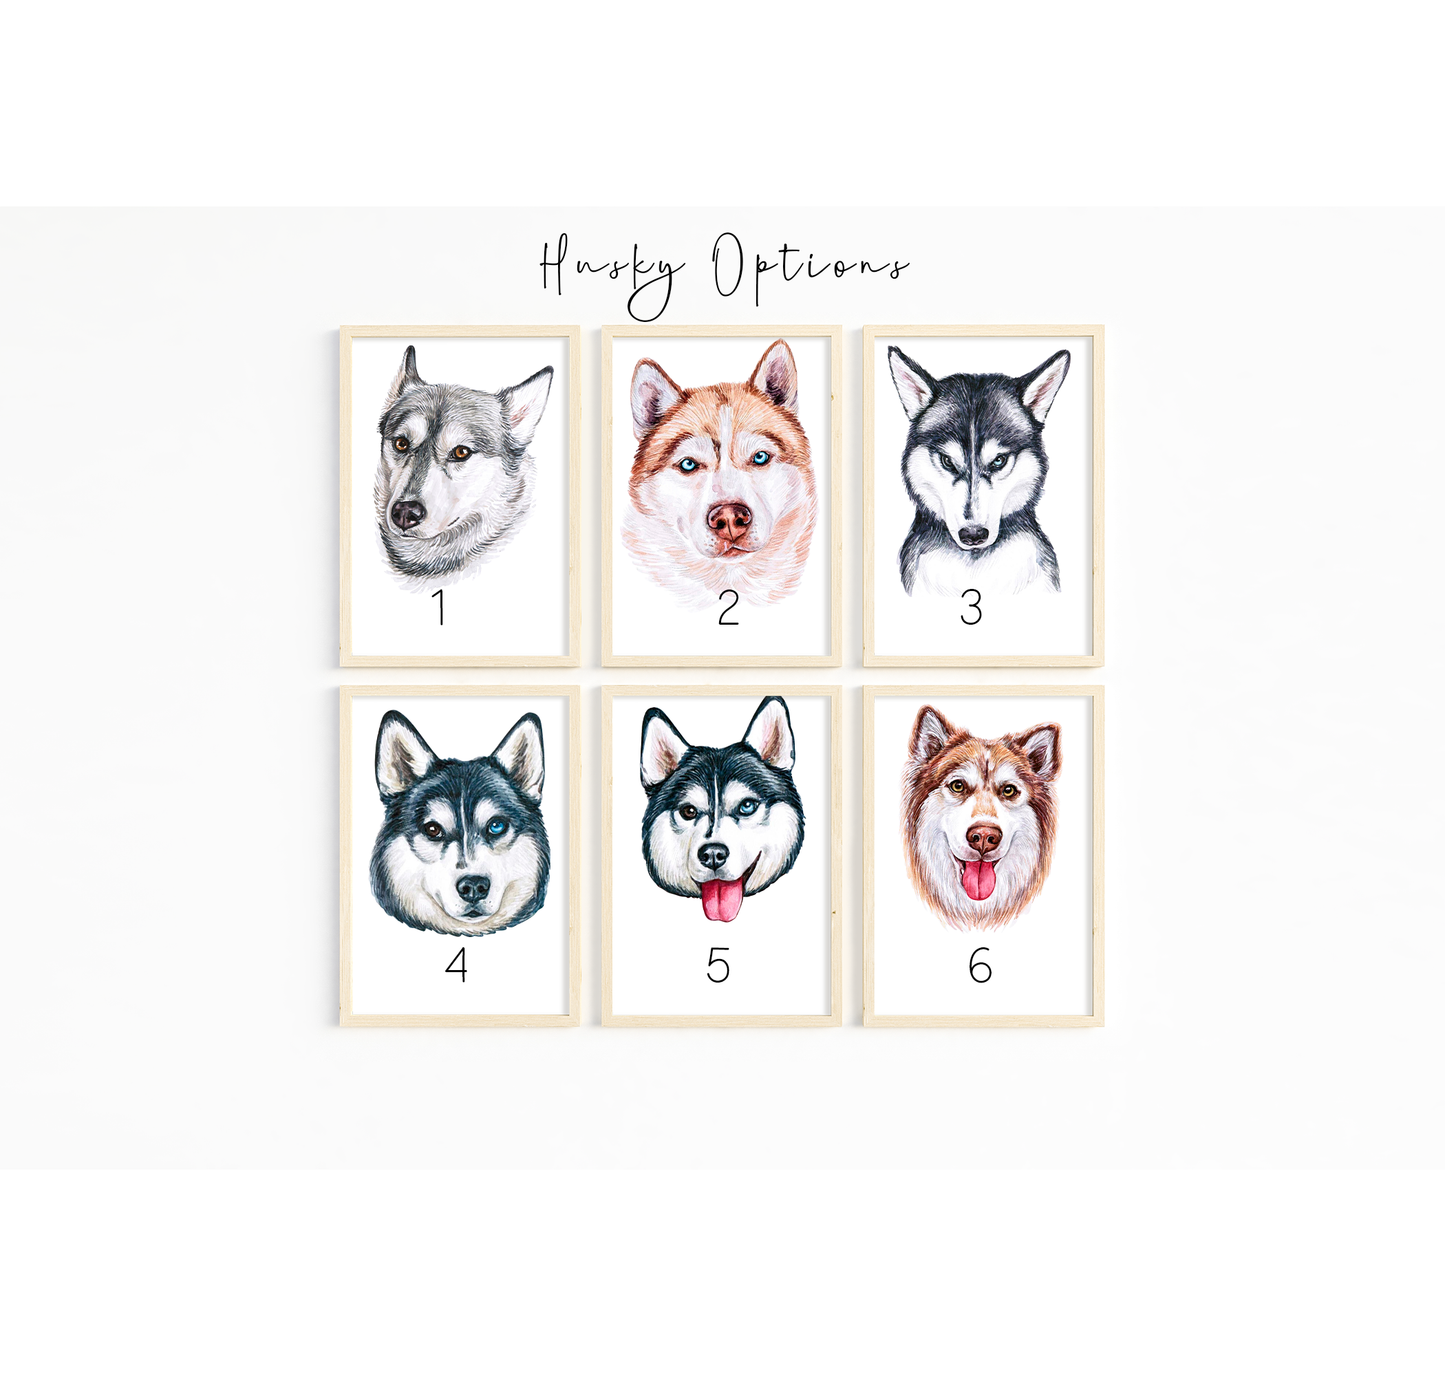 Siberian husky artwork - adorable dog portraits with custom funny or heart warming message | A4 | A5 | Greeting card